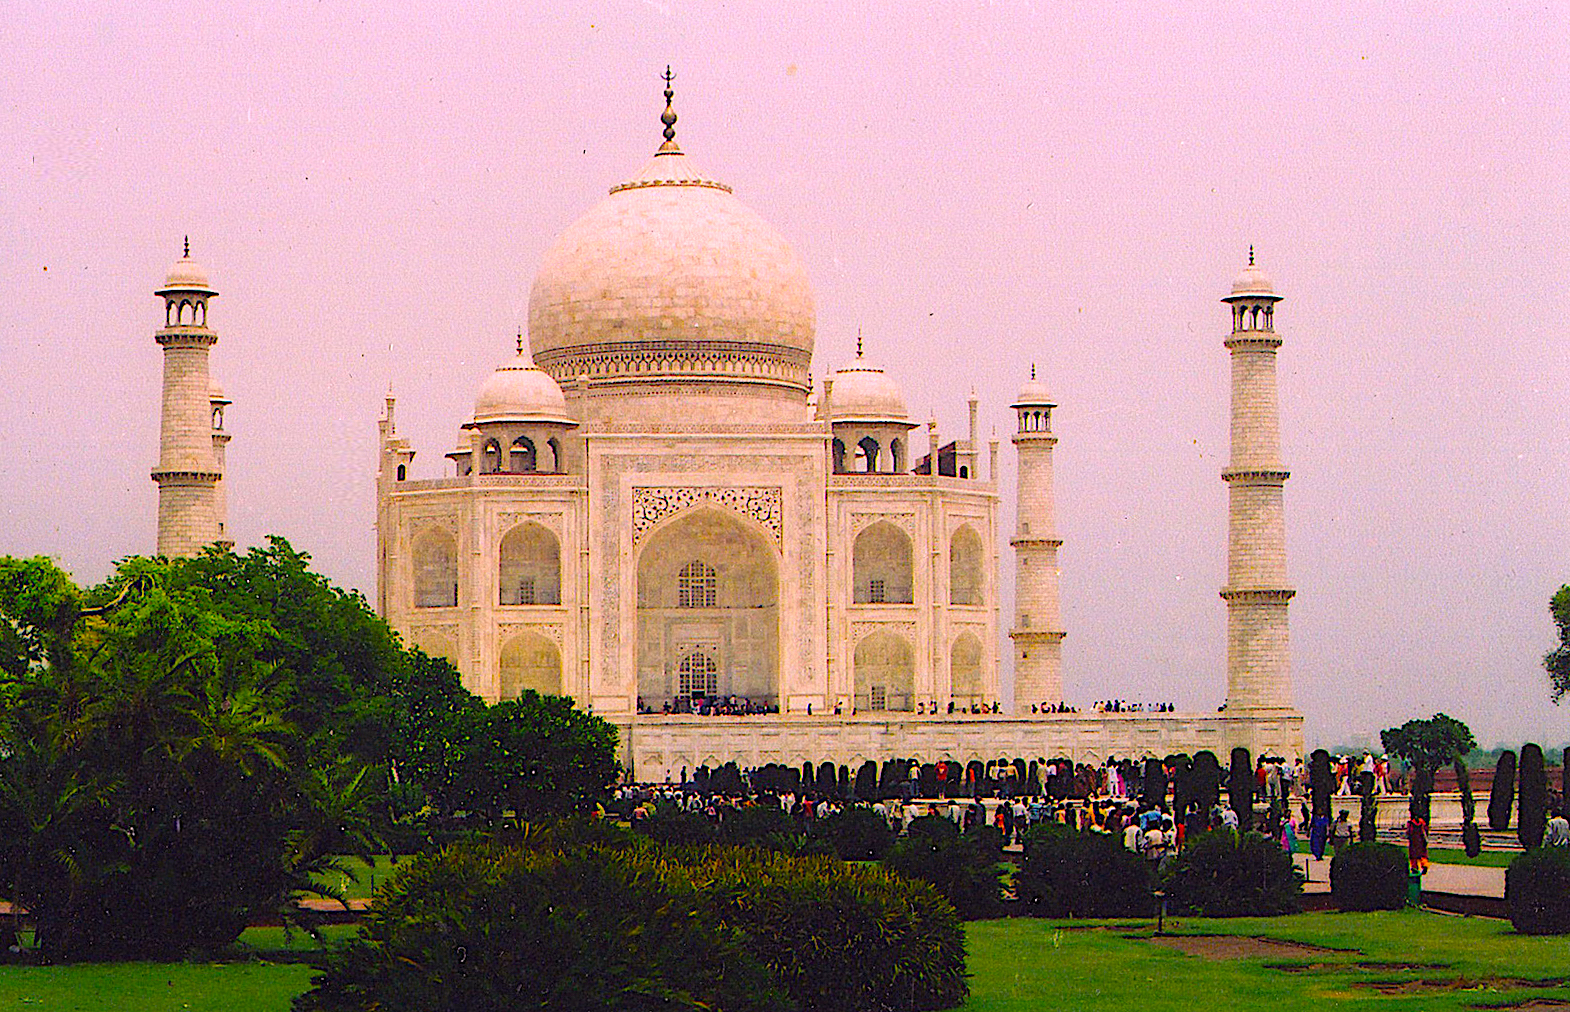 The Taj Mahal, which honors love for a wife, took 22 years & 1,000 elephants to complete